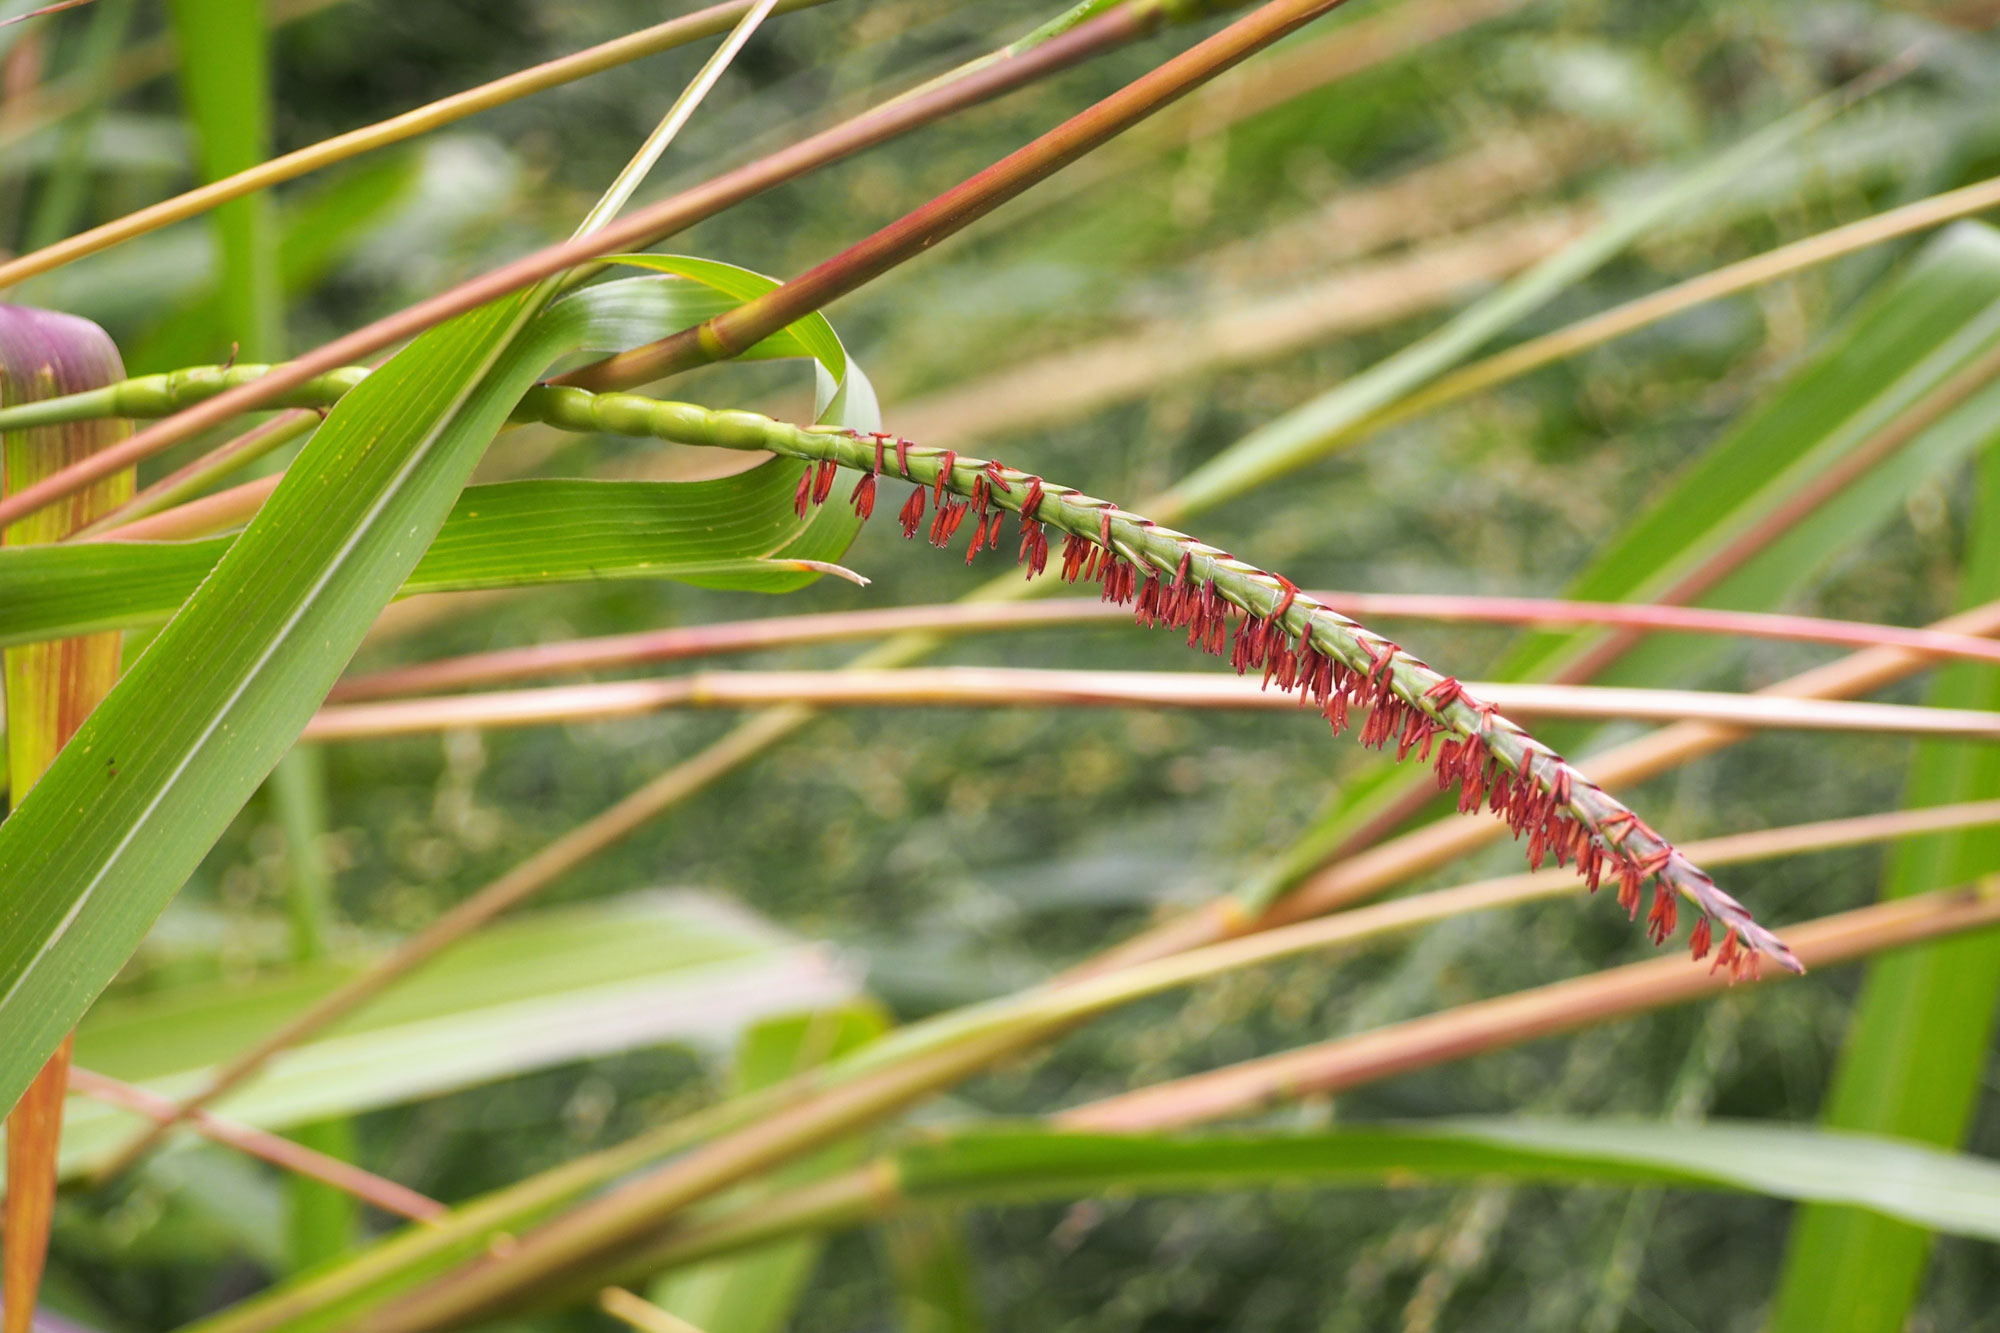 Photograph of eastern gamagrass. The photo shows an inflorescence of eastern gamagrass oriented horizontally with reddish anthers dangling down.